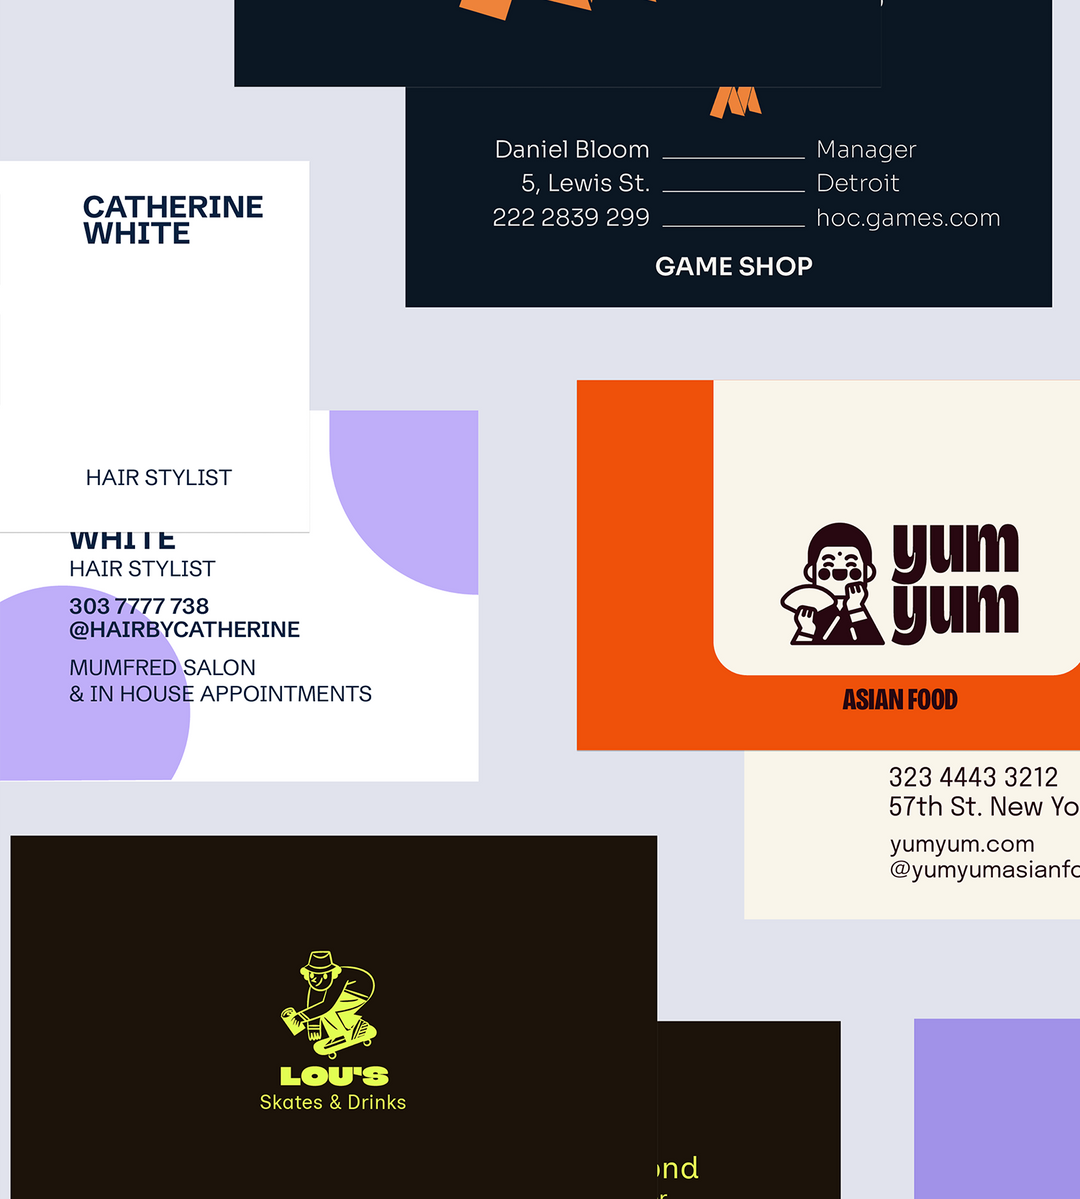 Creating your customized business cards